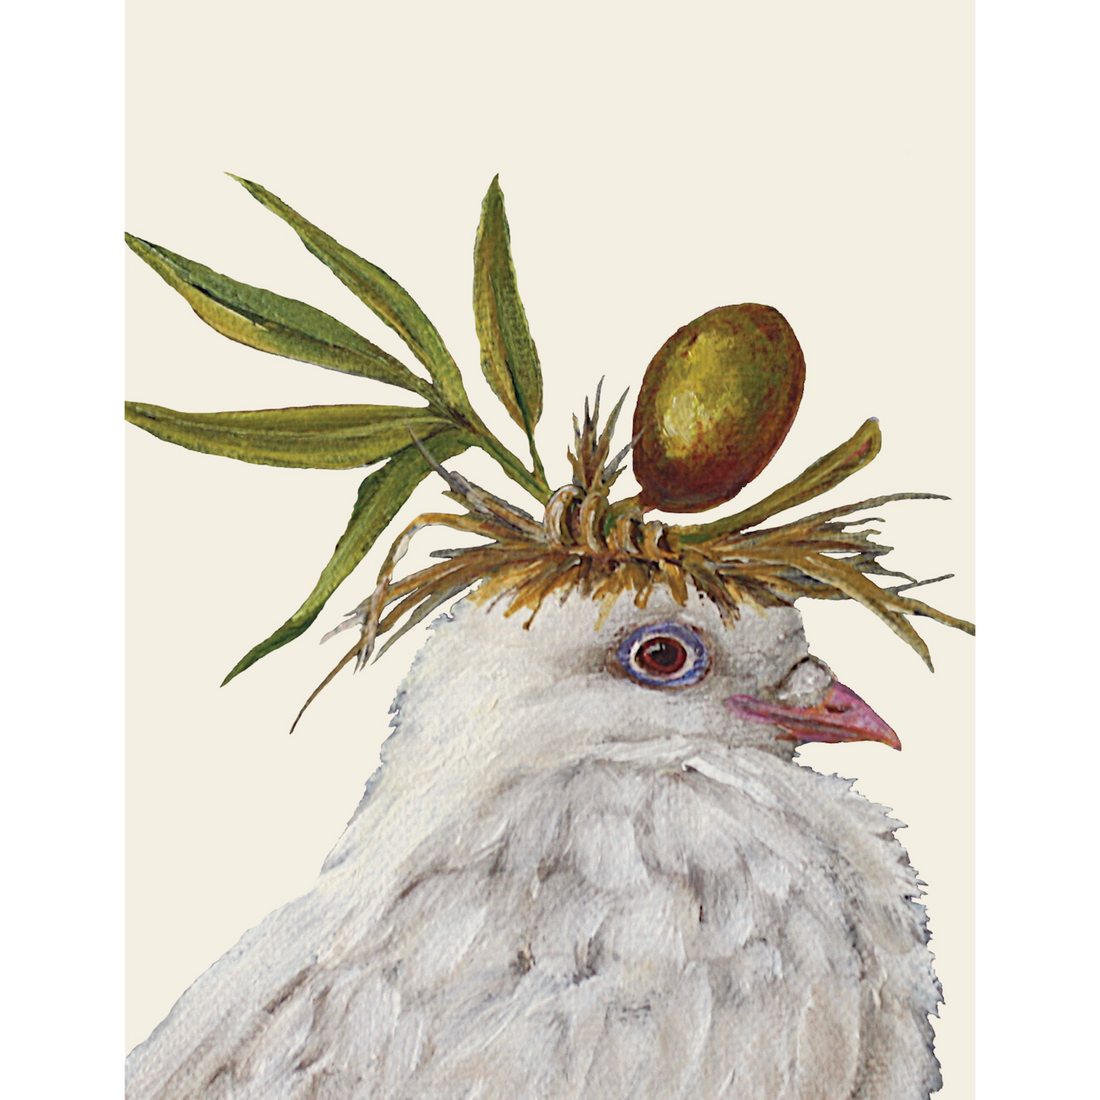 A painting of a white dove with an olive on its head, representing an original artwork by Hester &amp; Cook&